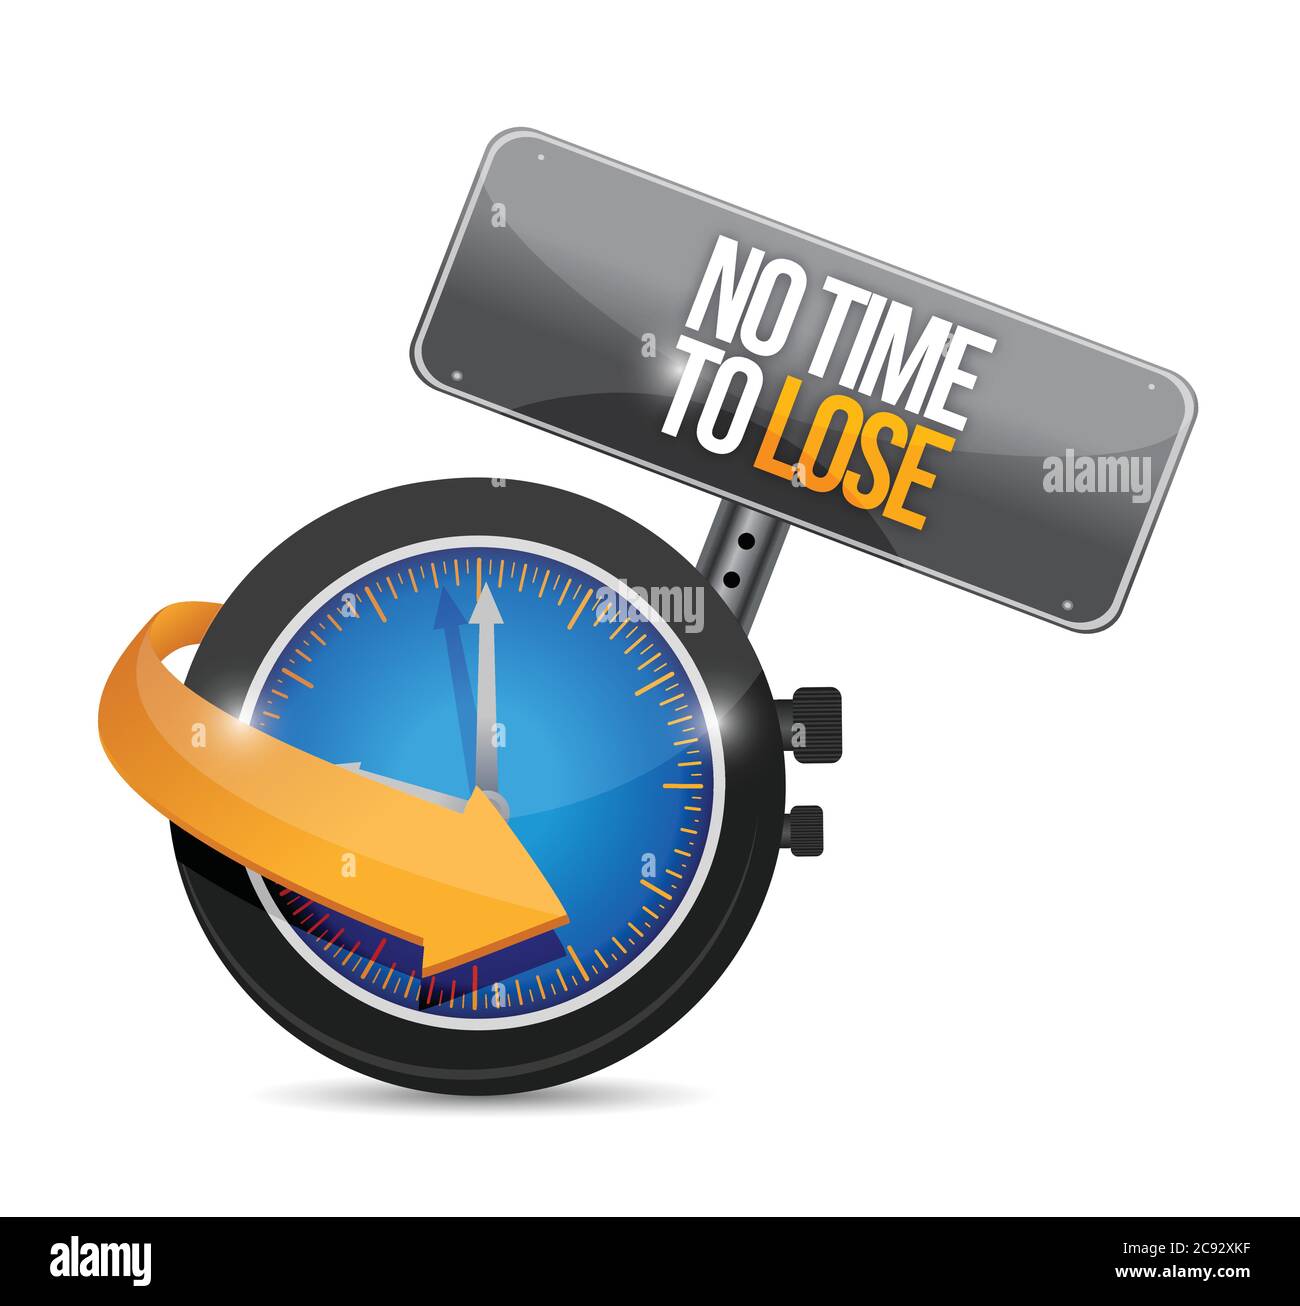 No time to lose concept illustration design over a white background Stock Vector